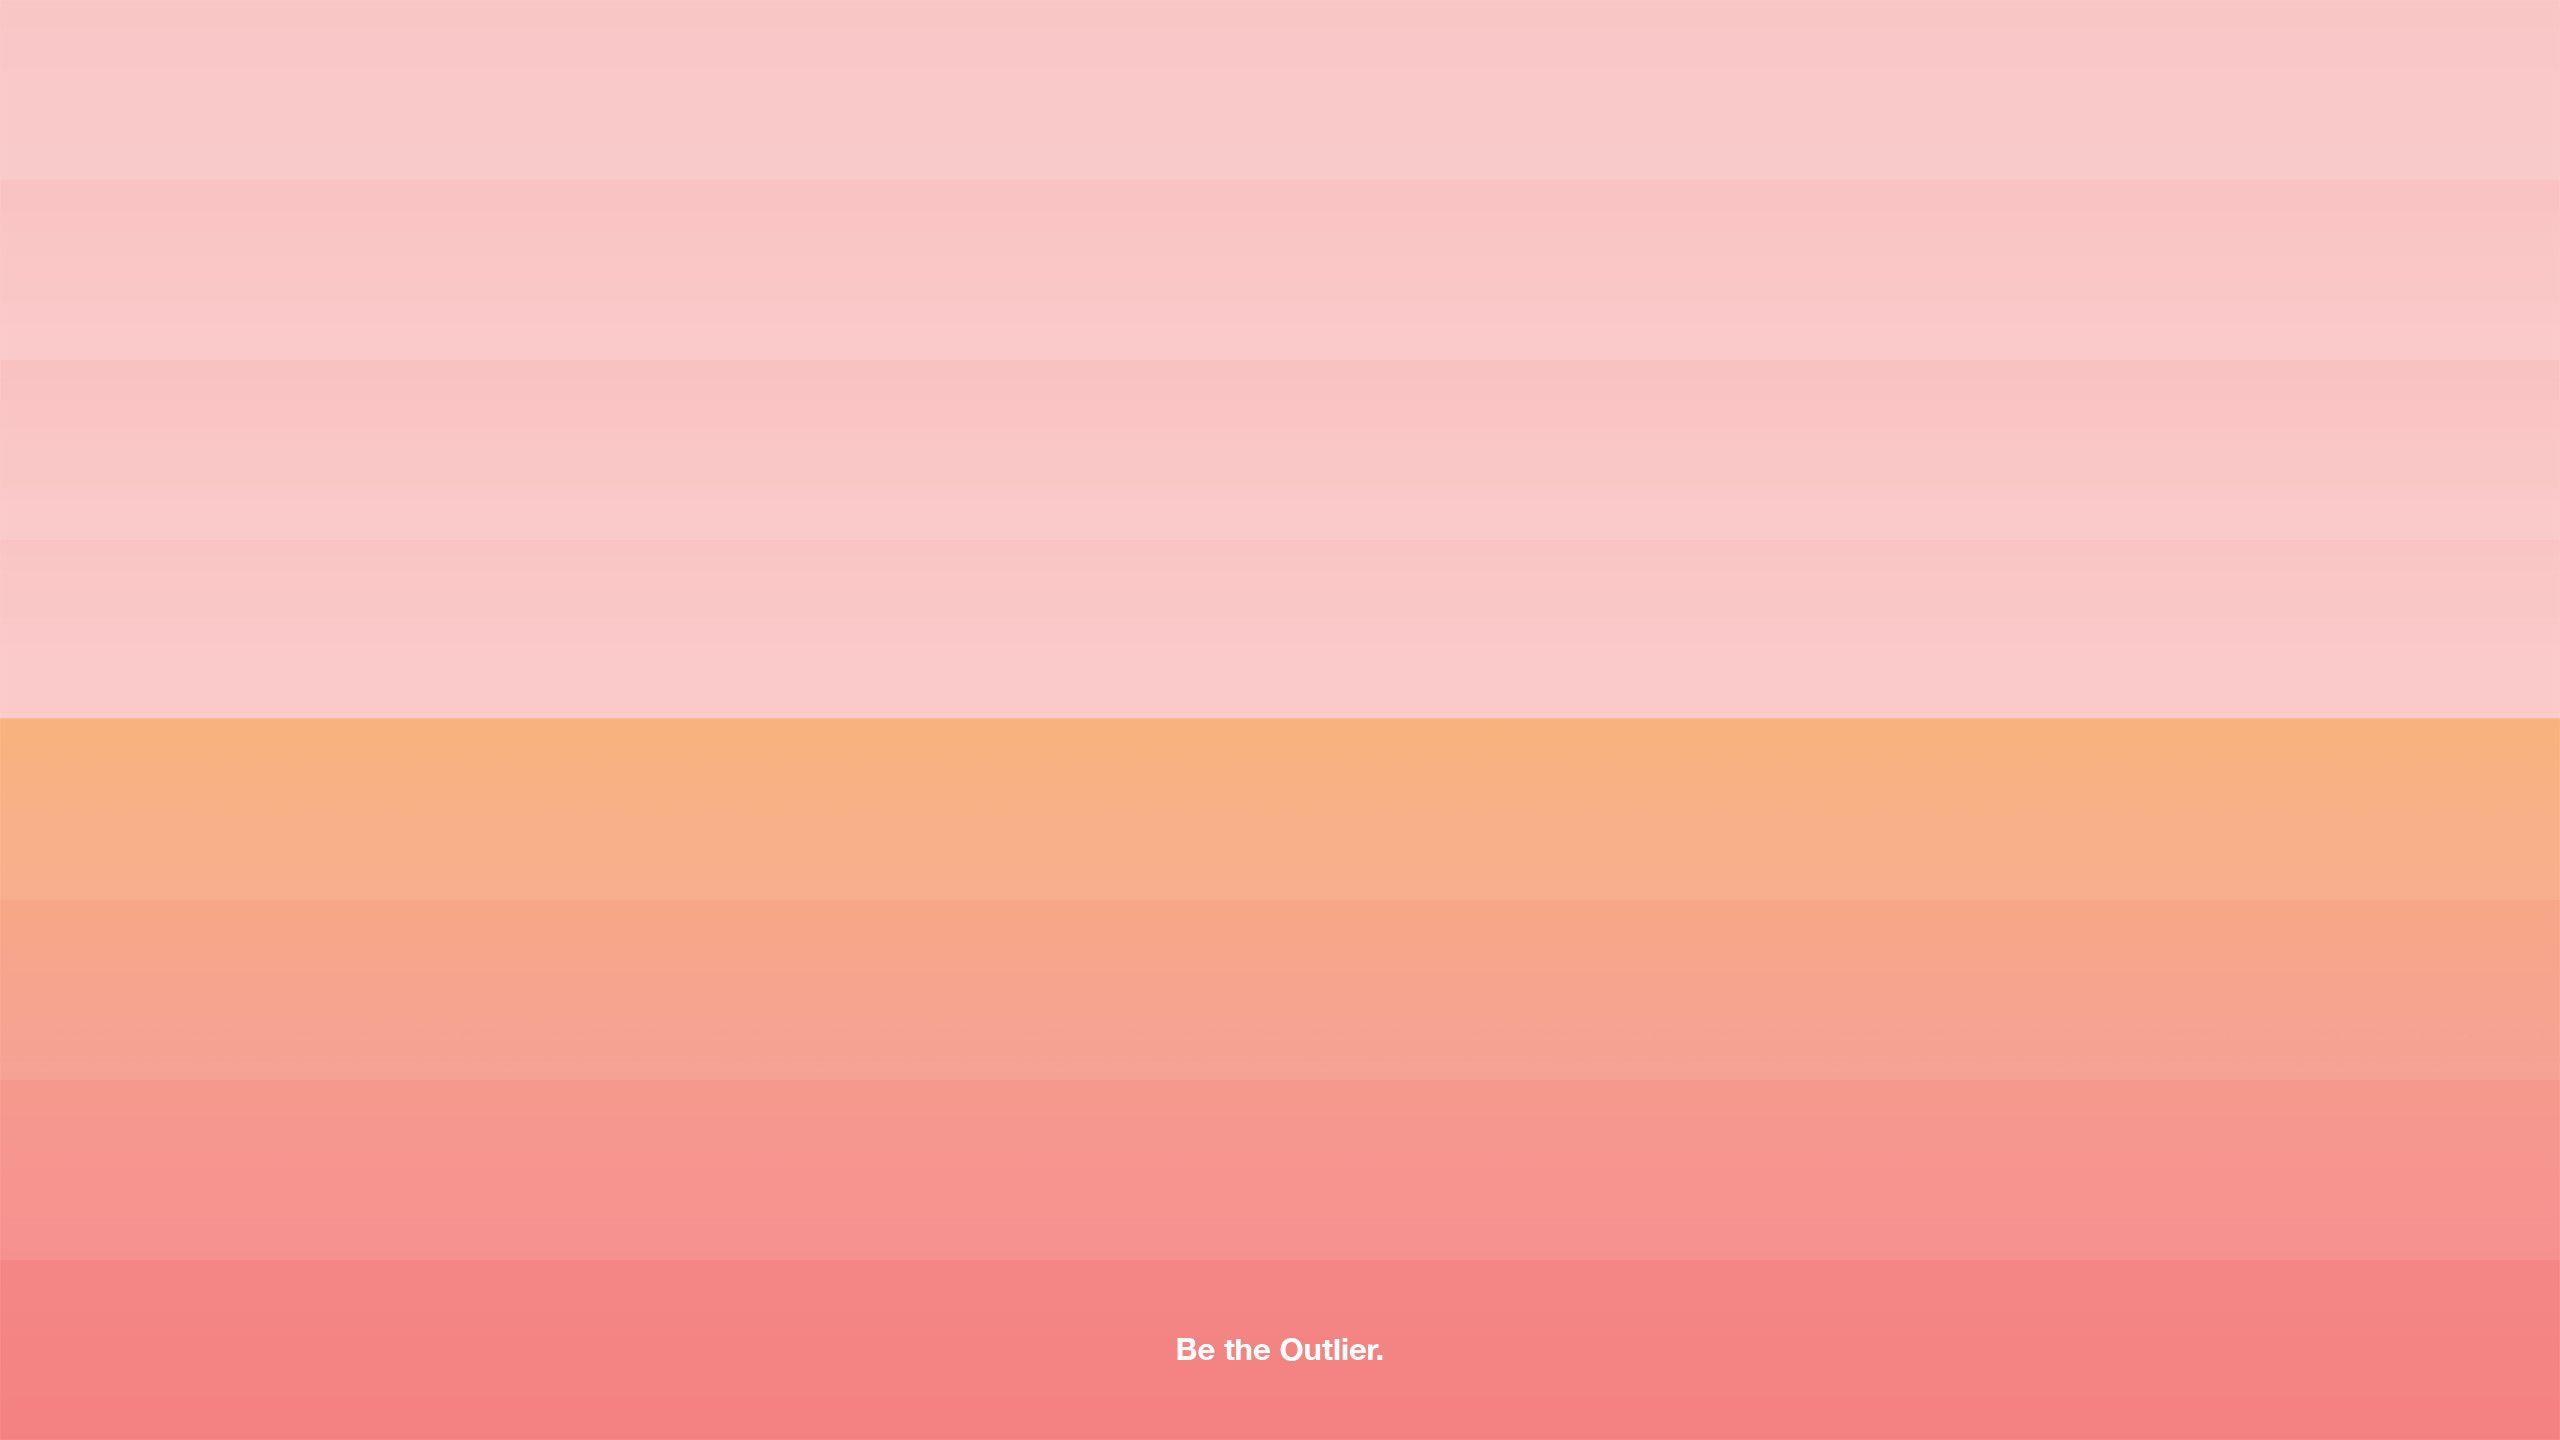 A gradient image with a pink and orange color scheme - 2560x1440